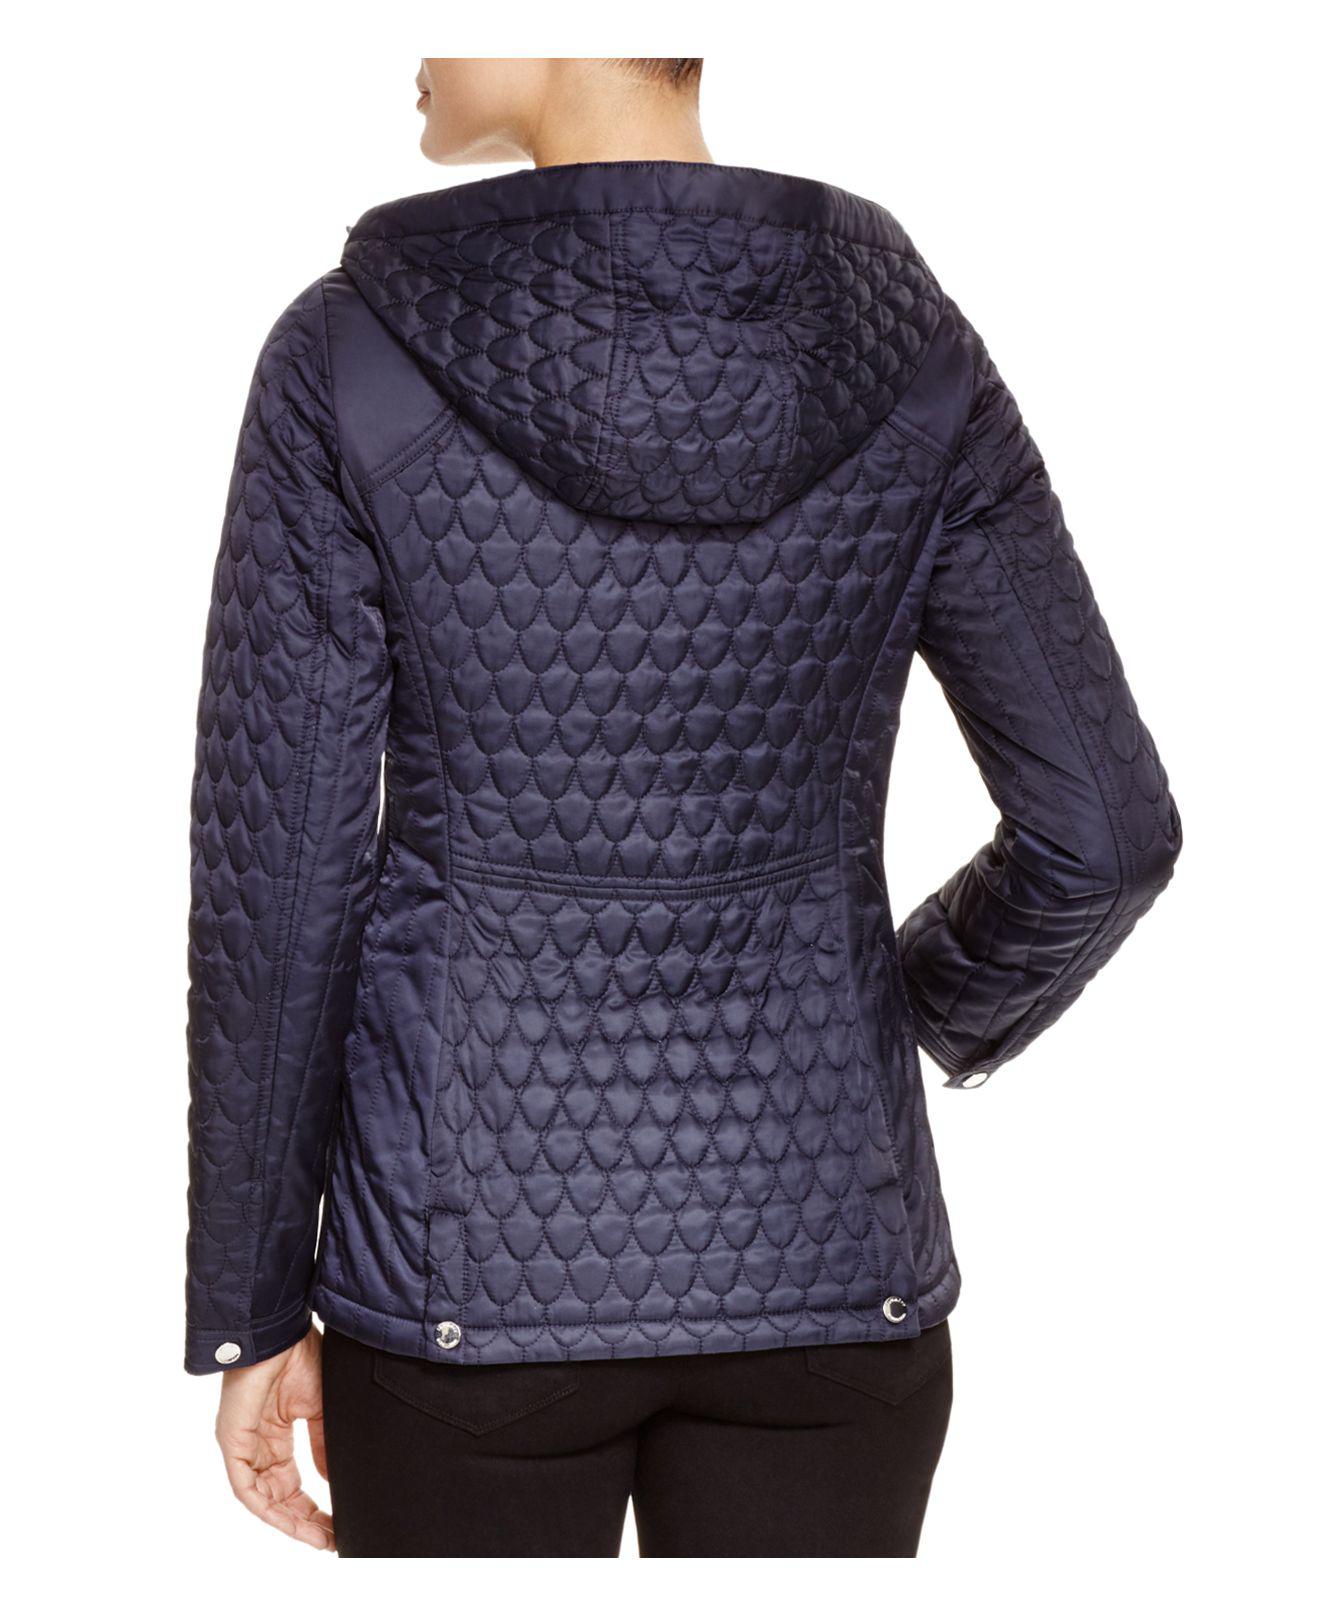 Laundry by Shelli Segal Quilted Hooded Jacket in Blue - Lyst